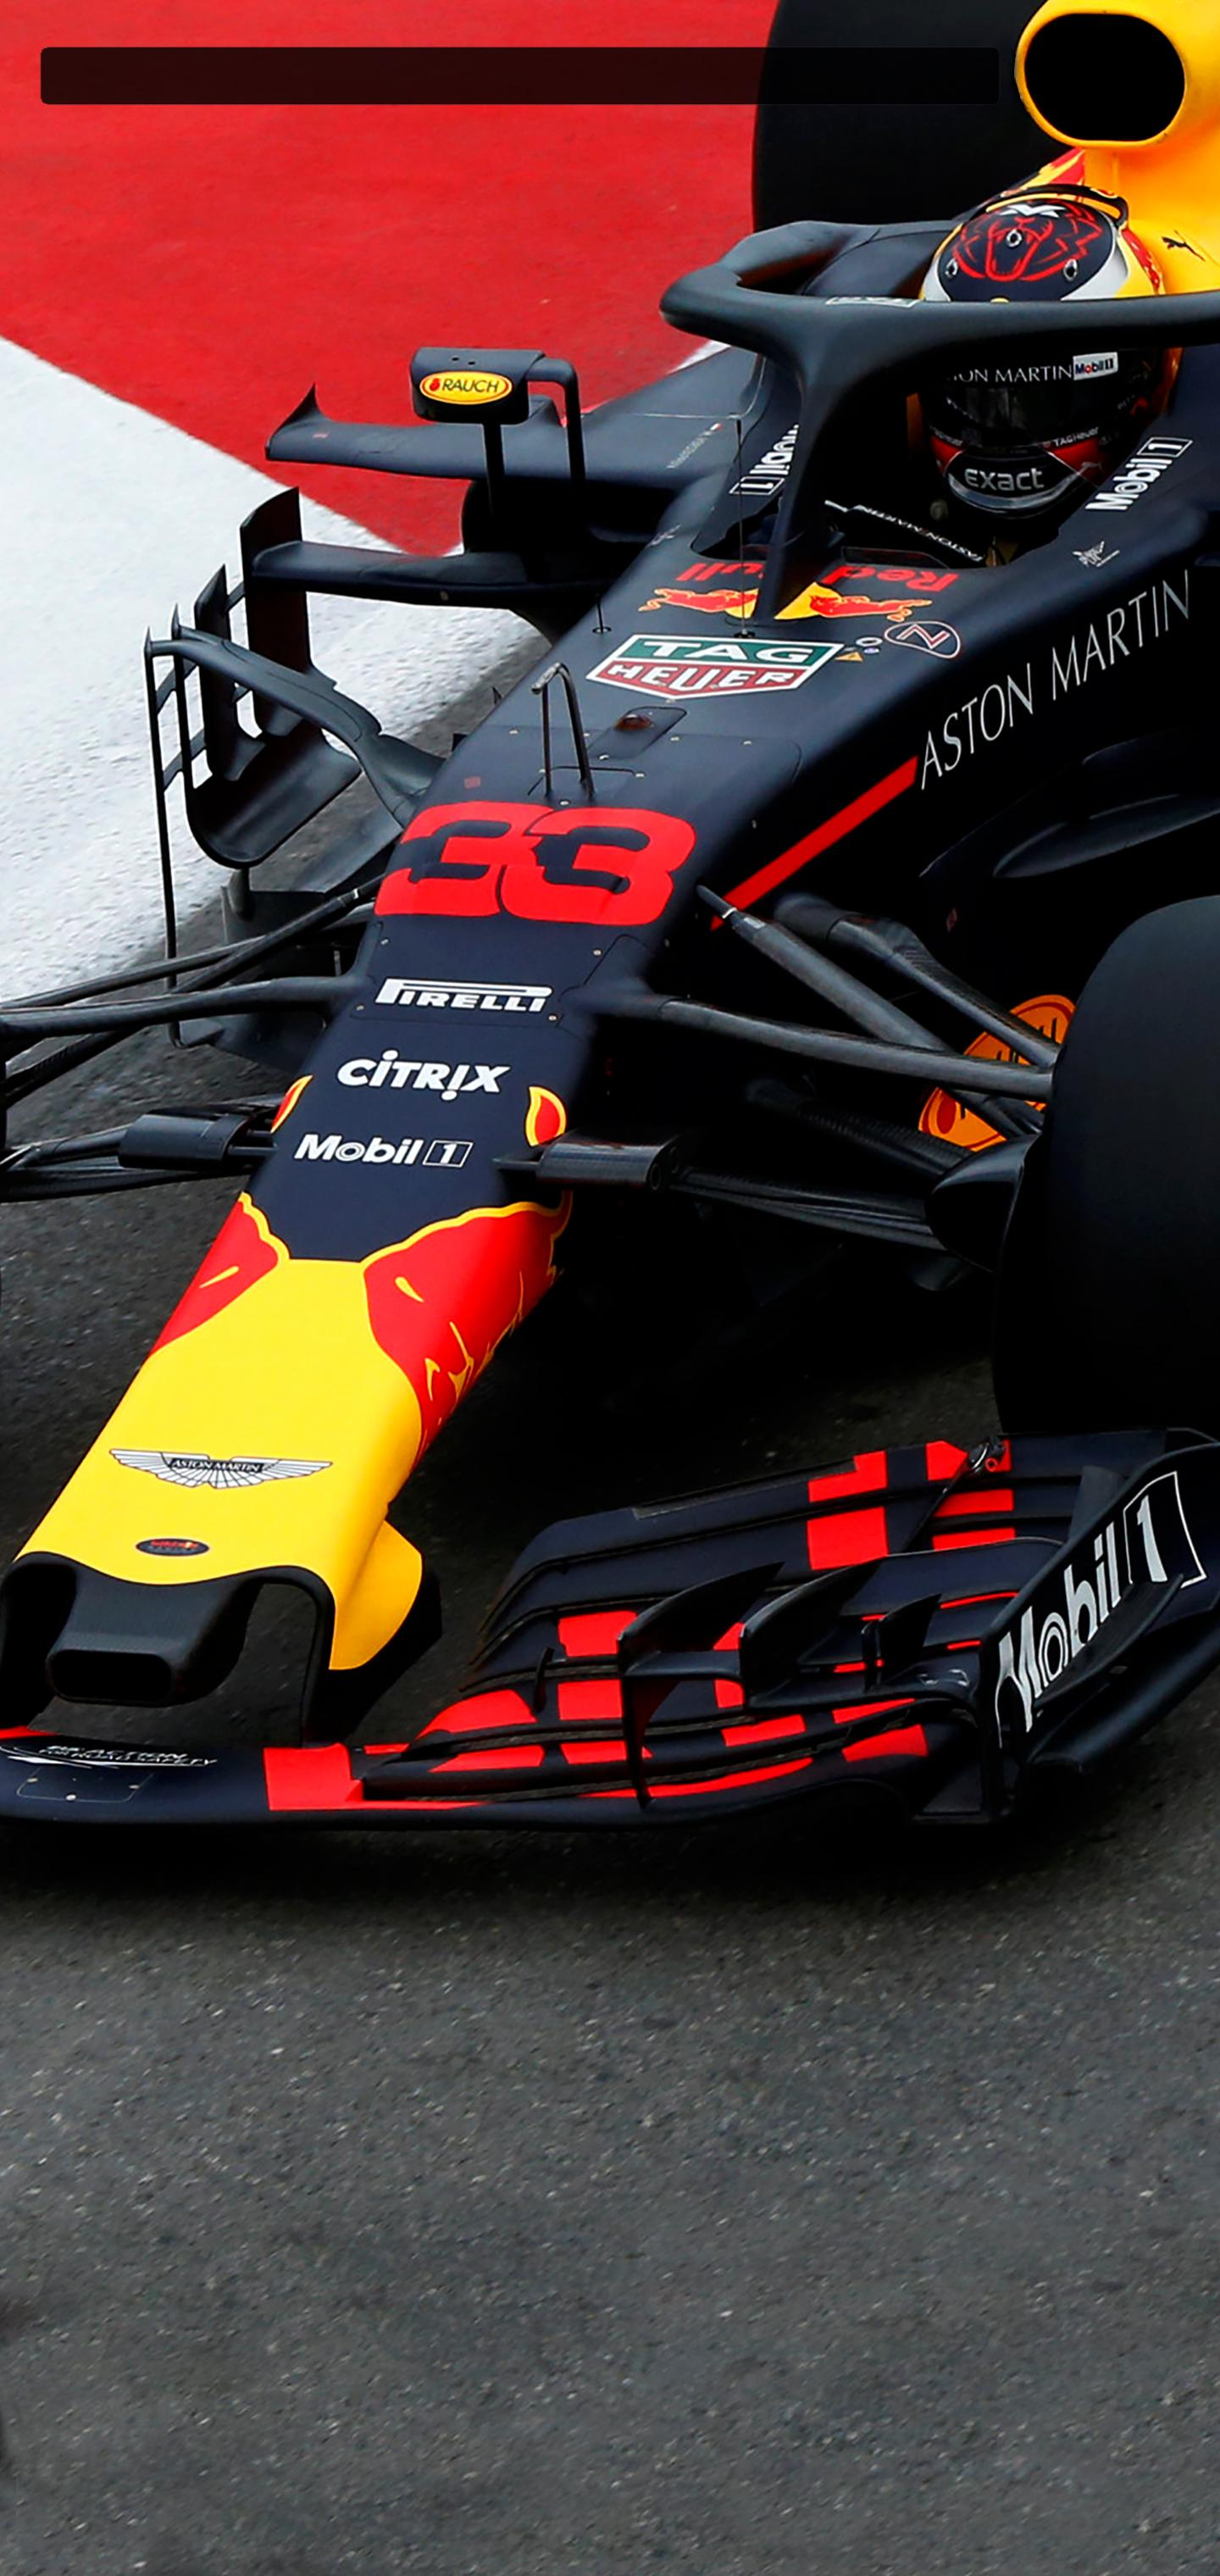 1440x3040 Red Bull F1 Racing by mbeats85 Galaxy S10 Hole-Punch Wallpaper